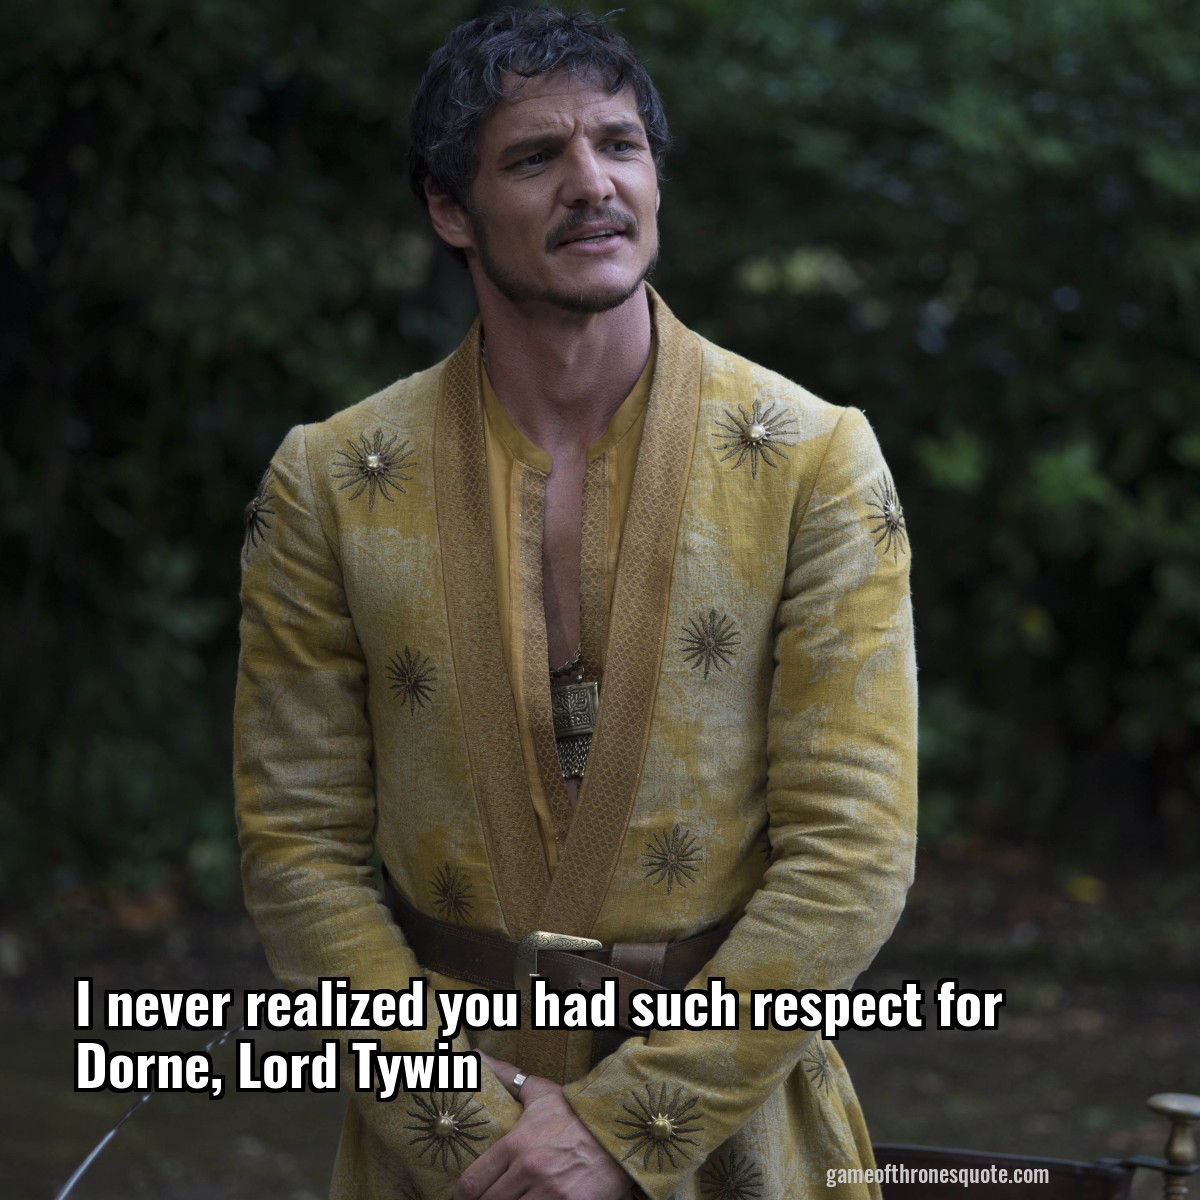 I never realized you had such respect for Dorne, Lord Tywin